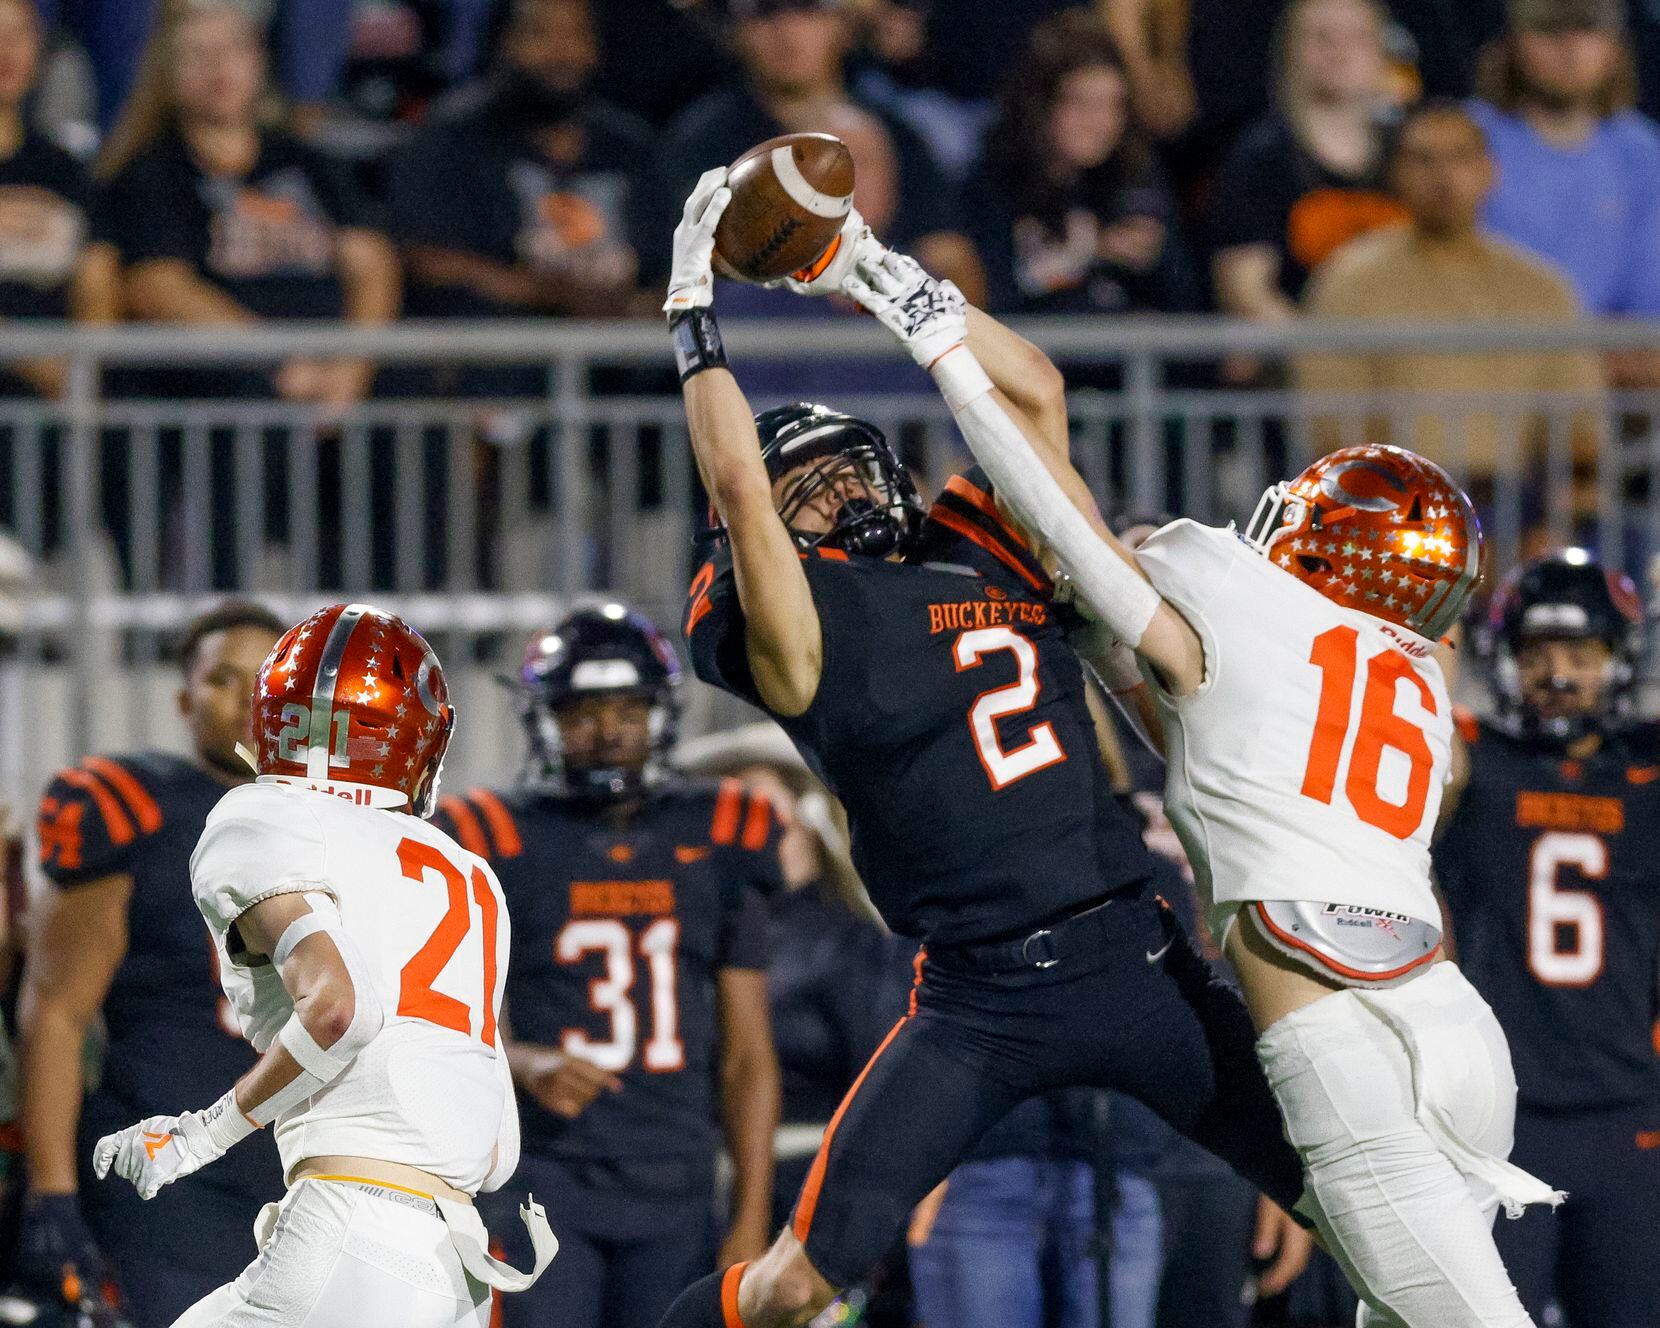 Celina defensive back Dean Hamilton (16) breaks up a pass intended for Gilmer wide receiver...